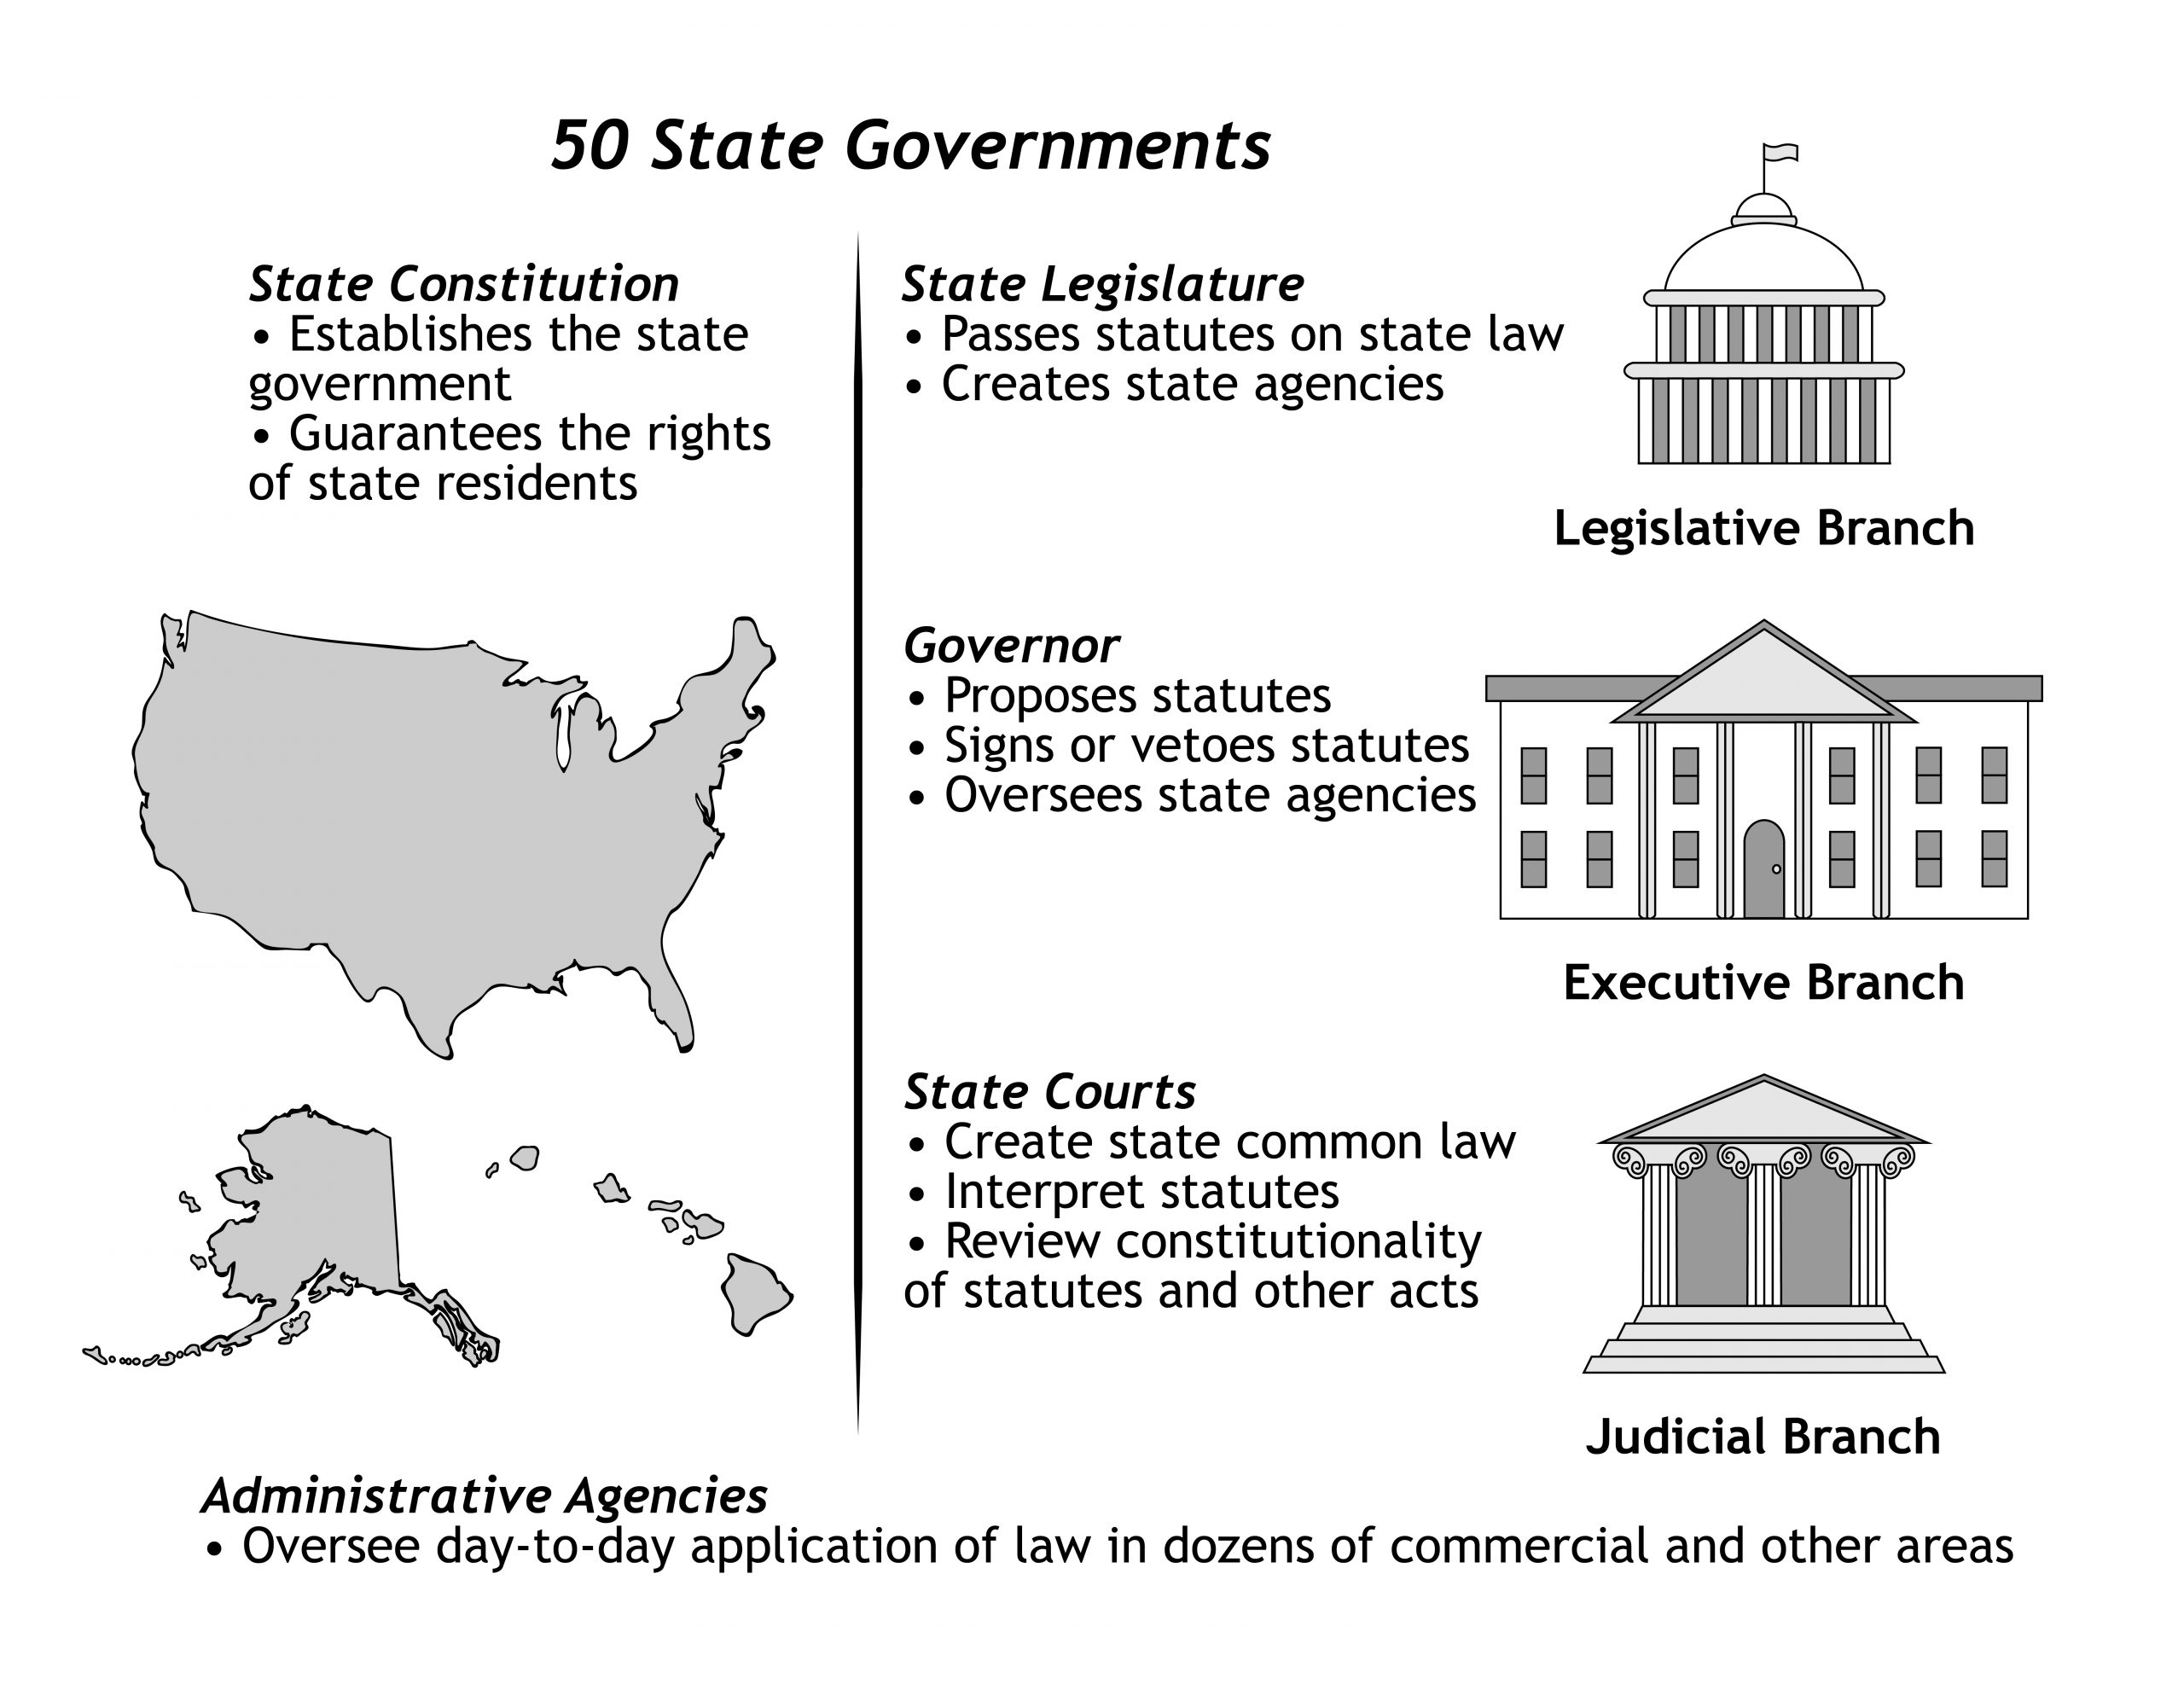 Graphic showing the responsibilities of each branch of the state governments